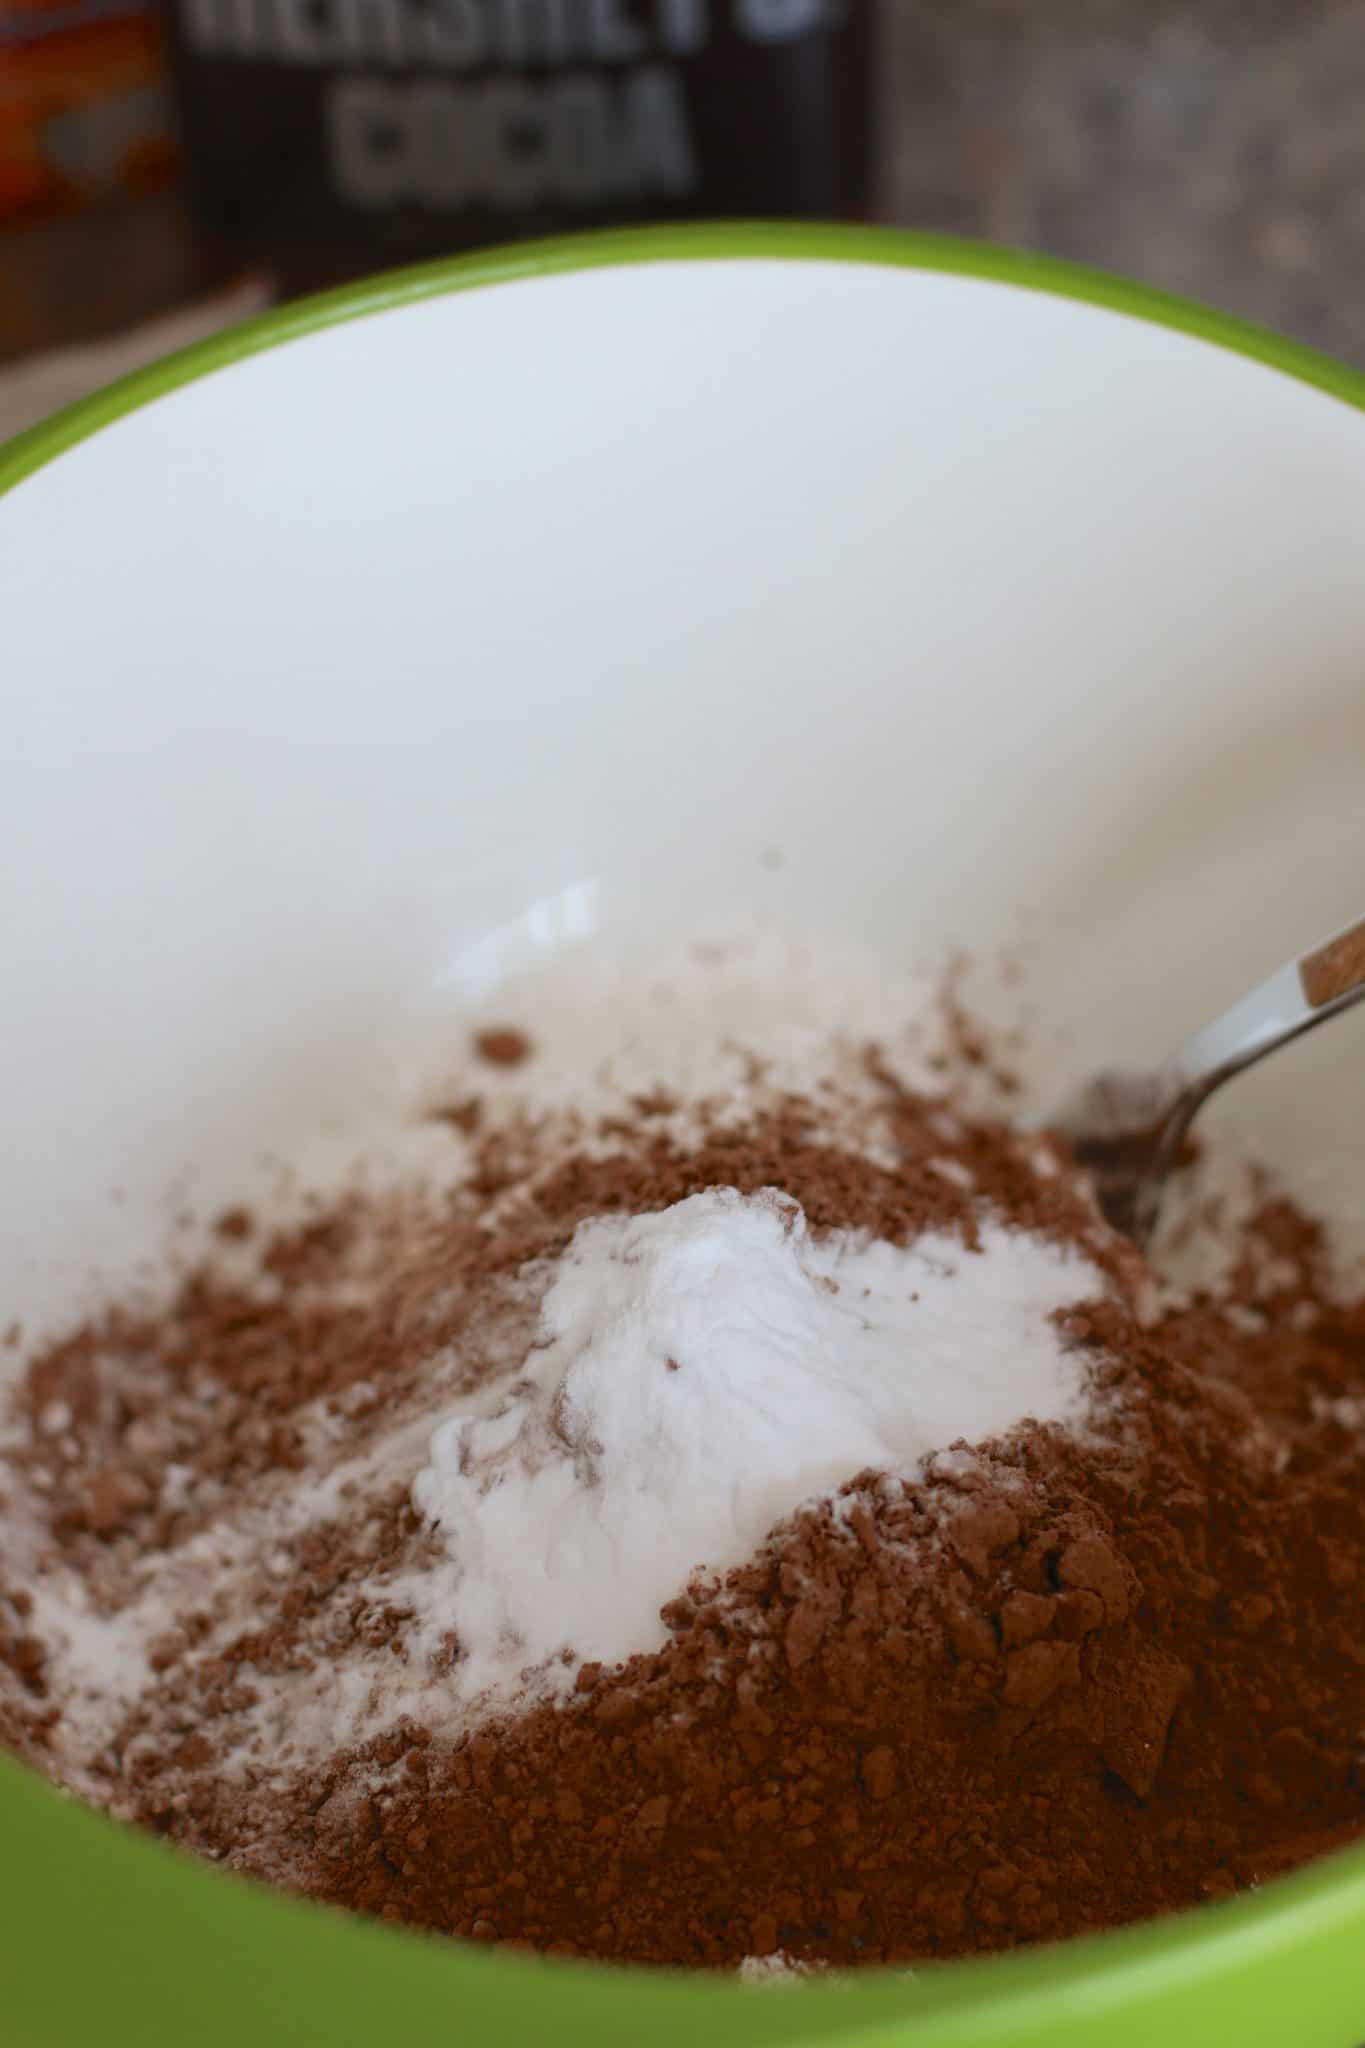 flour, baking soda and cocoa mixed together in a bowl.